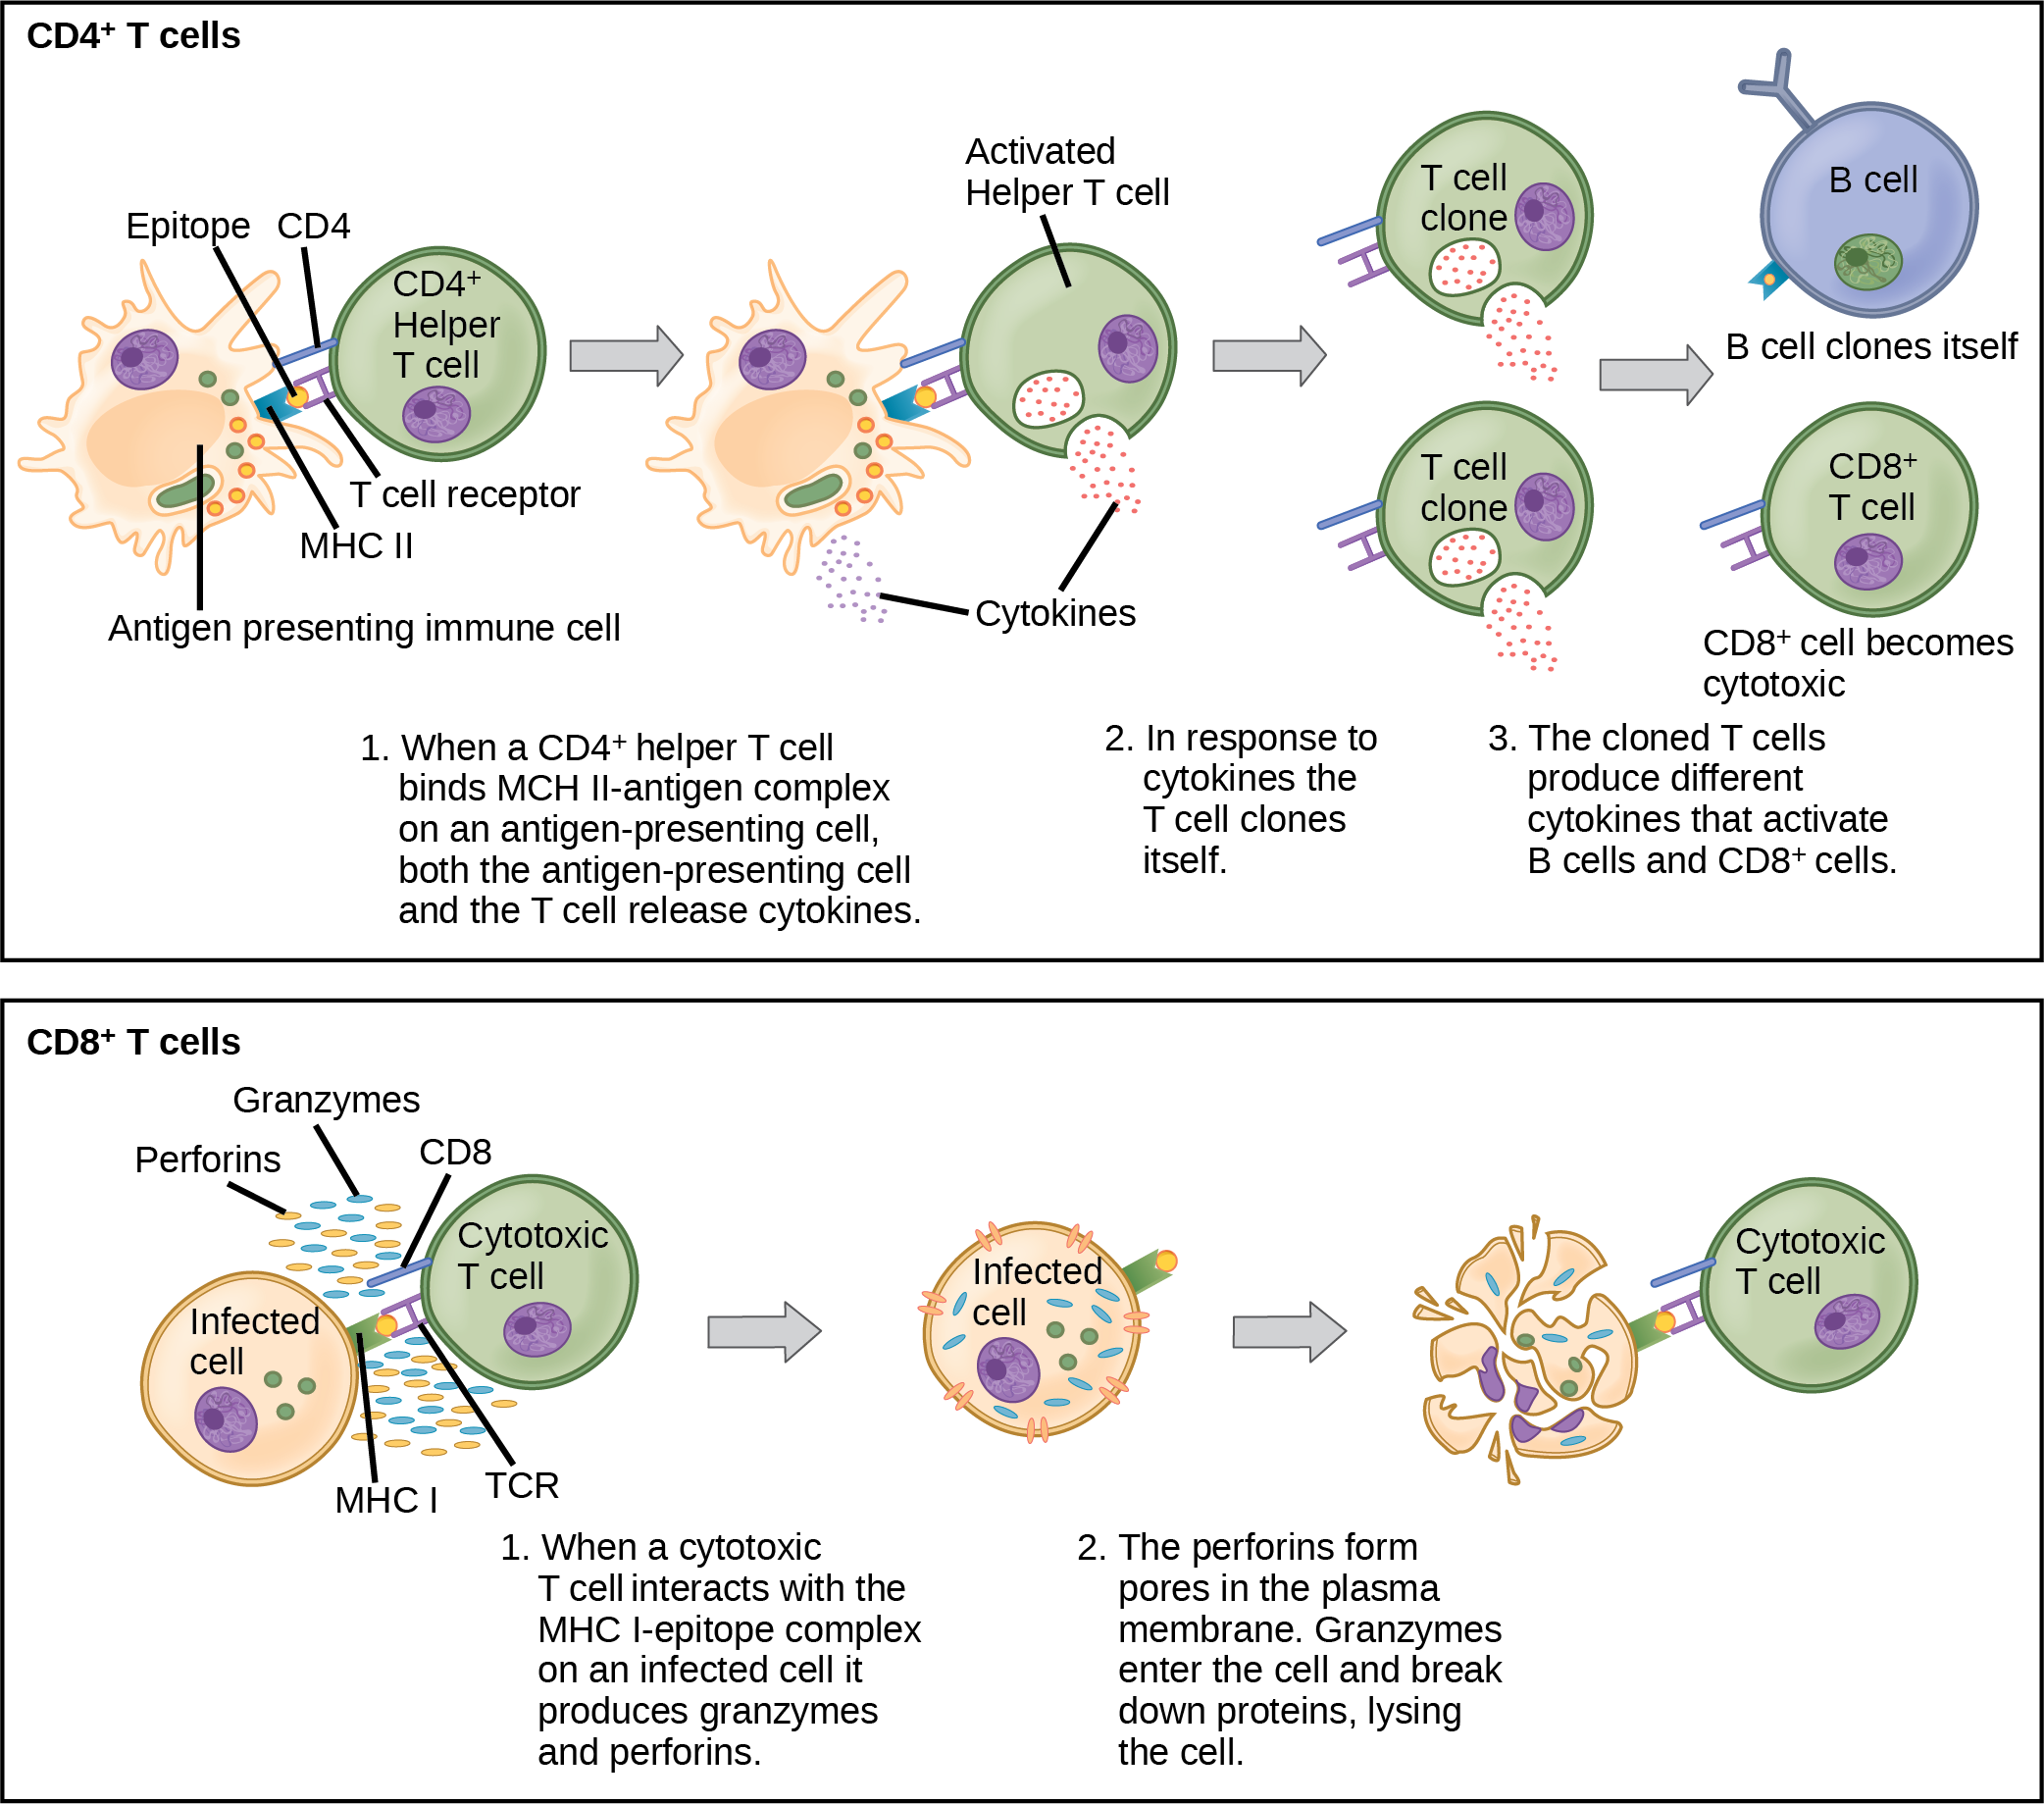 Illustration shows activation of a C D 4 plus helper T cell. An antigen-presenting cell digests a pathogen. Epitopes from this pathogen are presented in conjunction with M H C I I molecules on the cell surface. A T cell receptor and a C D 8 receptor, both on the surface of the T cell, bind the M H C I I epitope complex. As a result, the helper T cell becomes activated and both the helper T cell and antigen-presenting cell release cytokines. The cytokines induce the helper T cell to clone itself. The cloned helper T cells release different cytokines that activate B cells and C D 8 plus T cells, turning them into cytotoxic T cells. The cytotoxic and binds the M H C I epitope complex on an infected cell. The cytotoxic T cell then releases perforin molecules, which form a pore in the plasma membrane, and granzymes, which break down proteins, killing the cell.